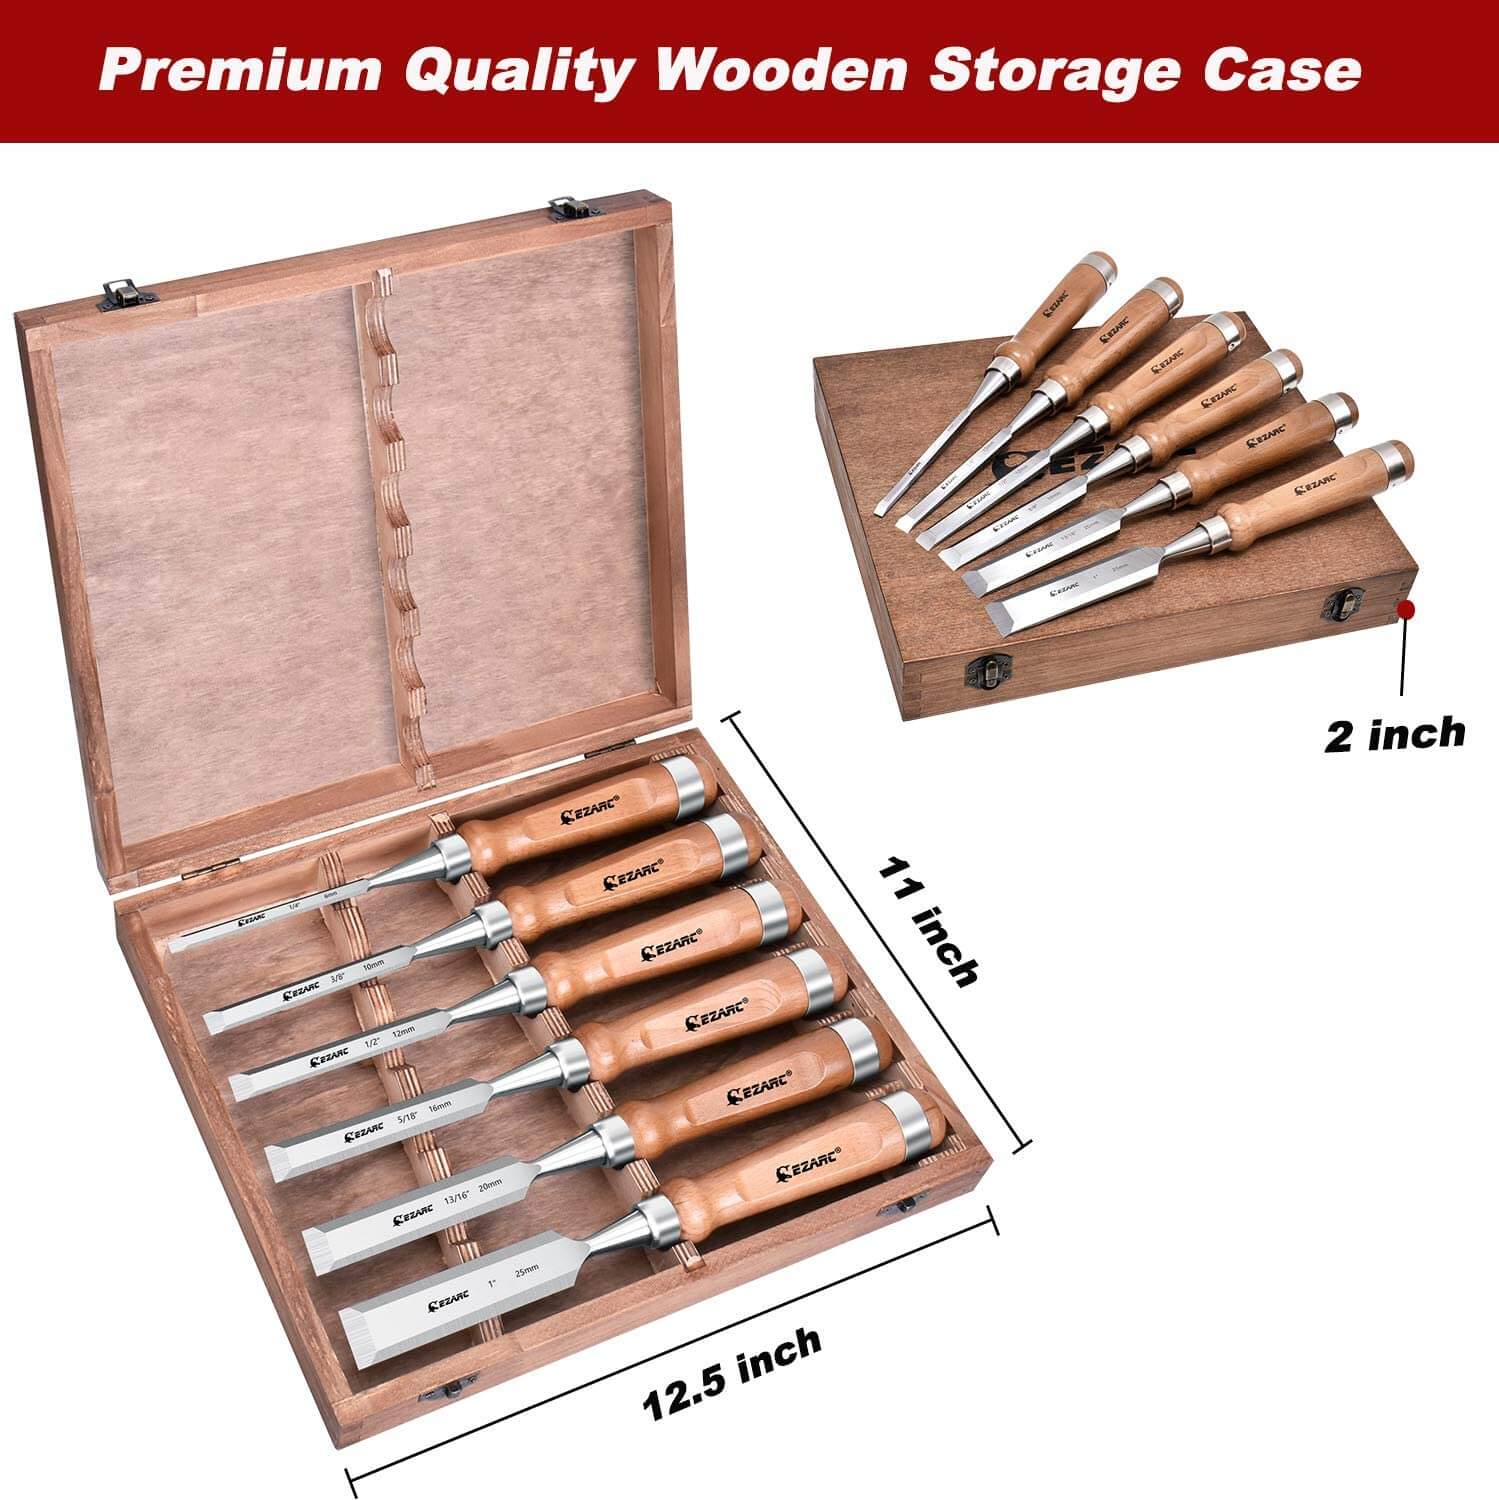 HAWERK Wood Chisel Sets - Wood Carving Chisels with Premium Wooden Case -  Includes 6 pcs Wood Chisels